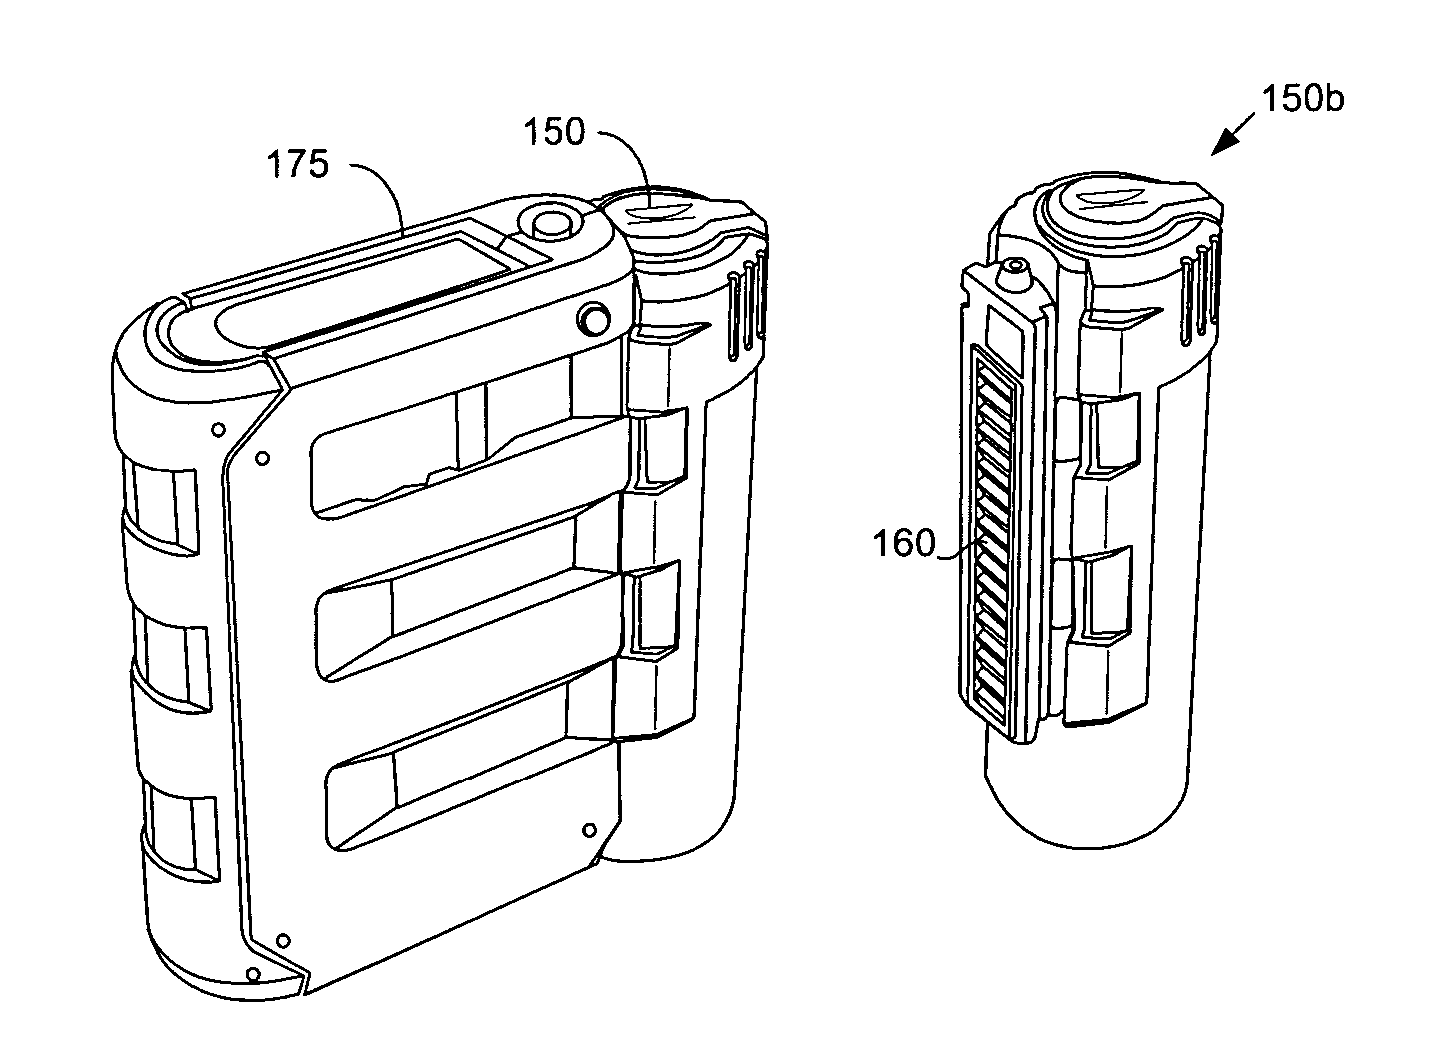 Disposable component on a fuel cartridge and for use with a portable fuel cell system